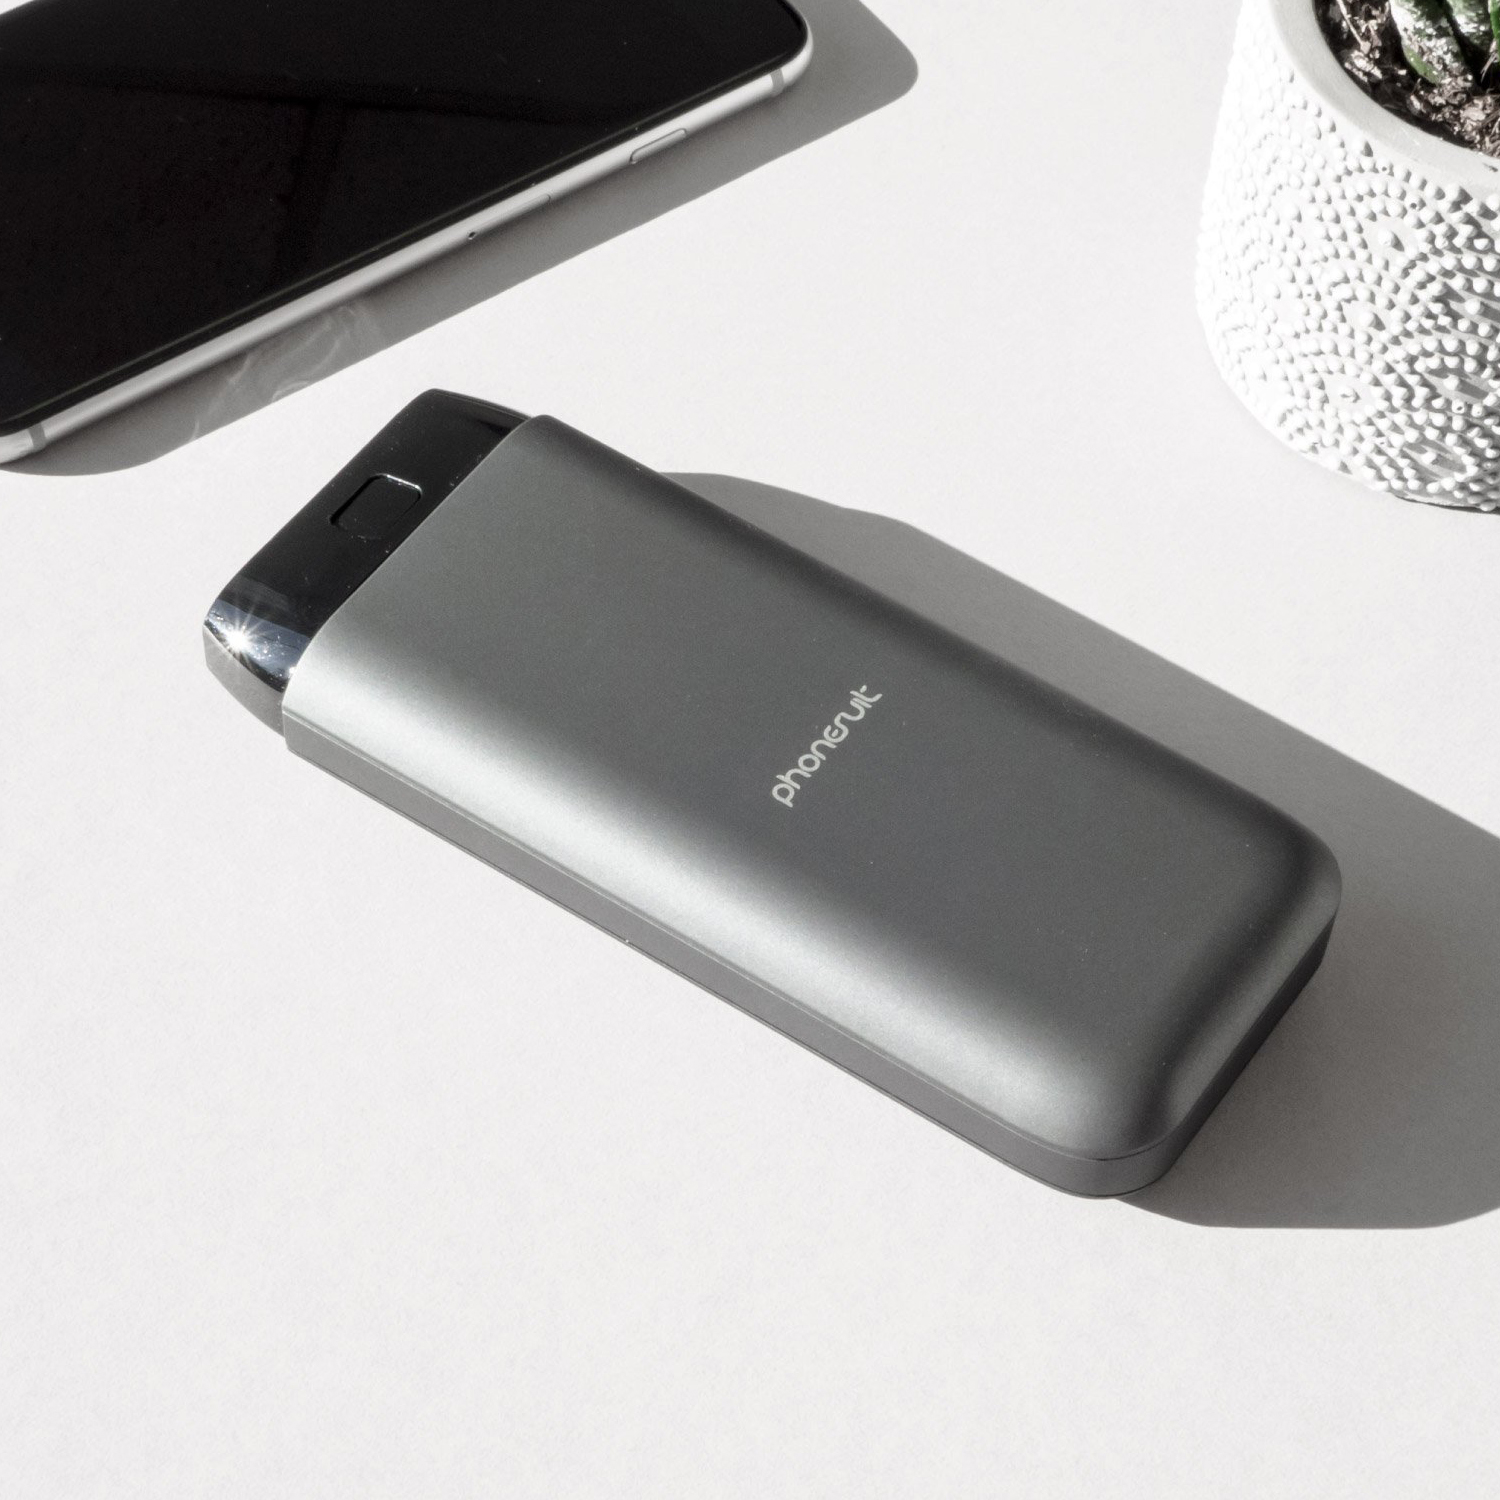 PhoneSuit Energy Core Max Power Bank 20,000mAh for iPhone, SAMSUNG and More - image 3 of 6